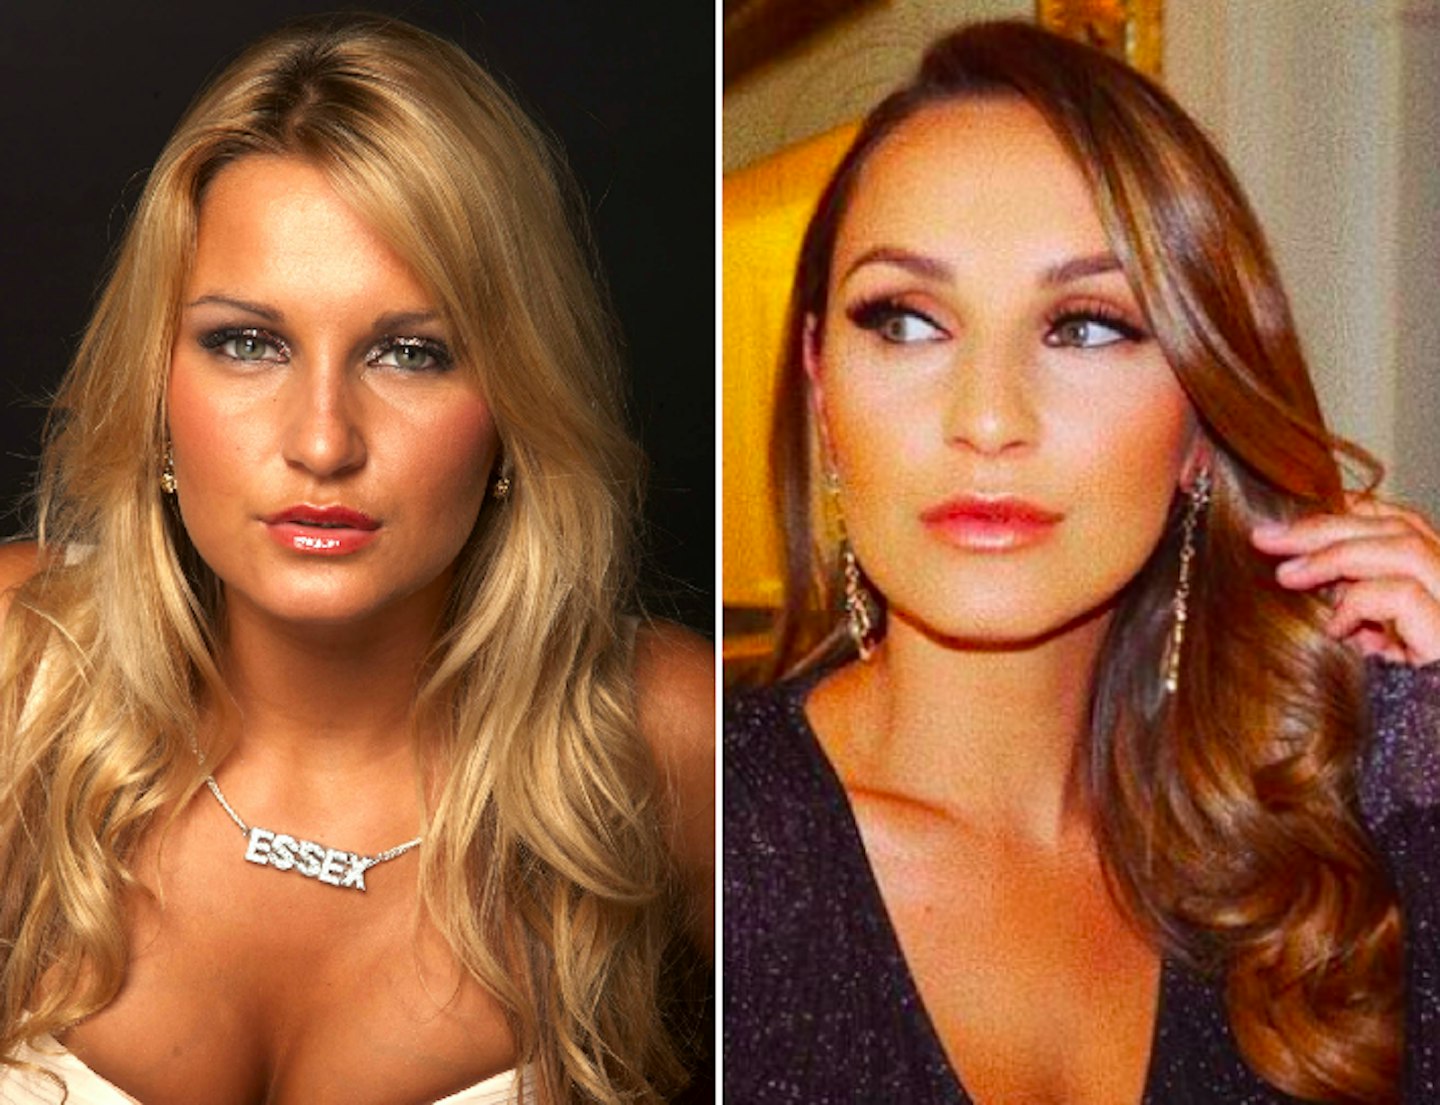 Sam Faiers before and after plastic surgery